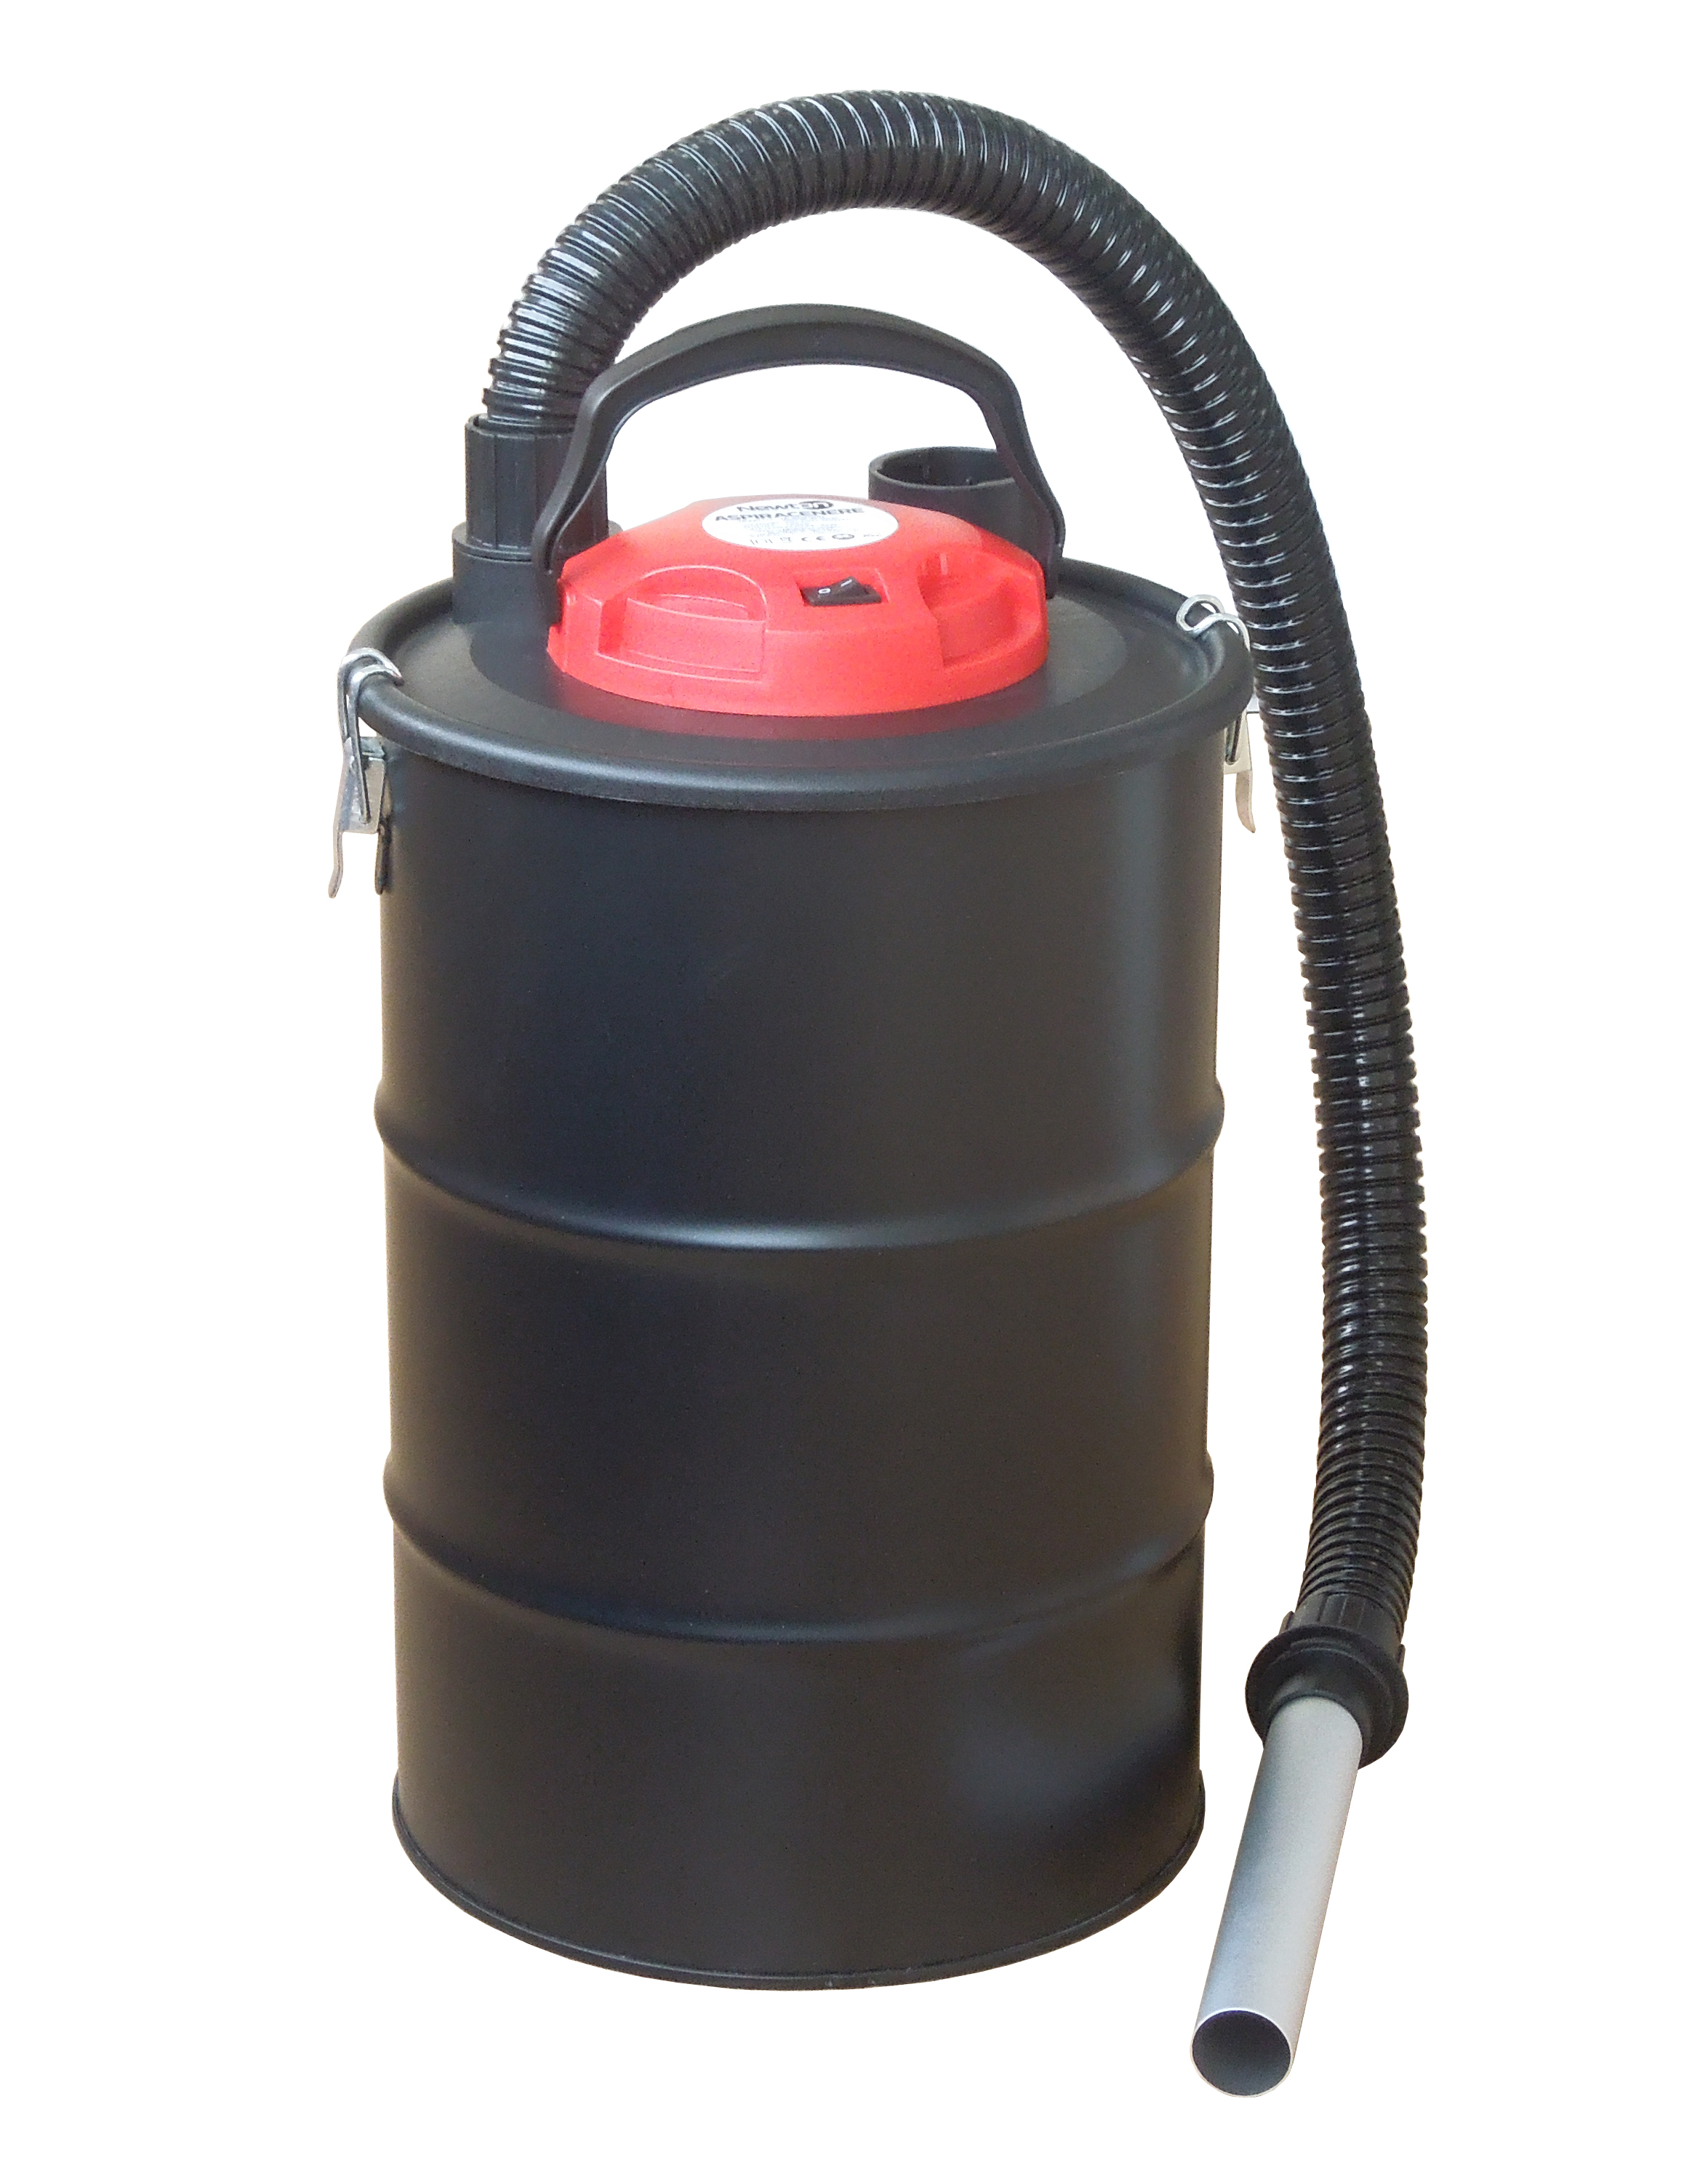 Electrical ash cleaner